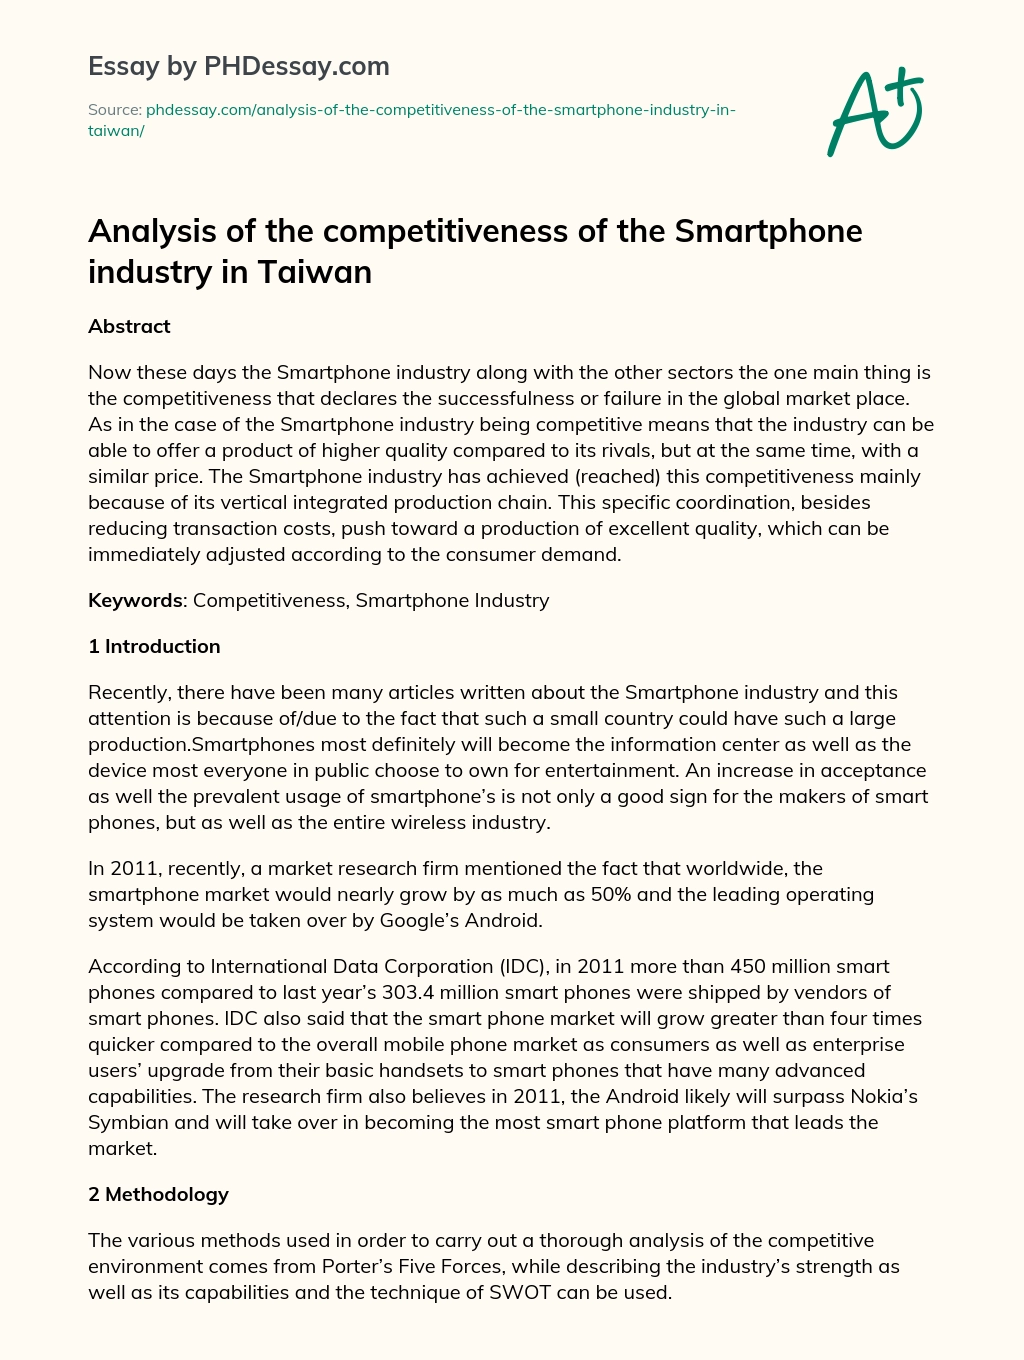 Analysis of the competitiveness of the Smartphone industry in Taiwan essay